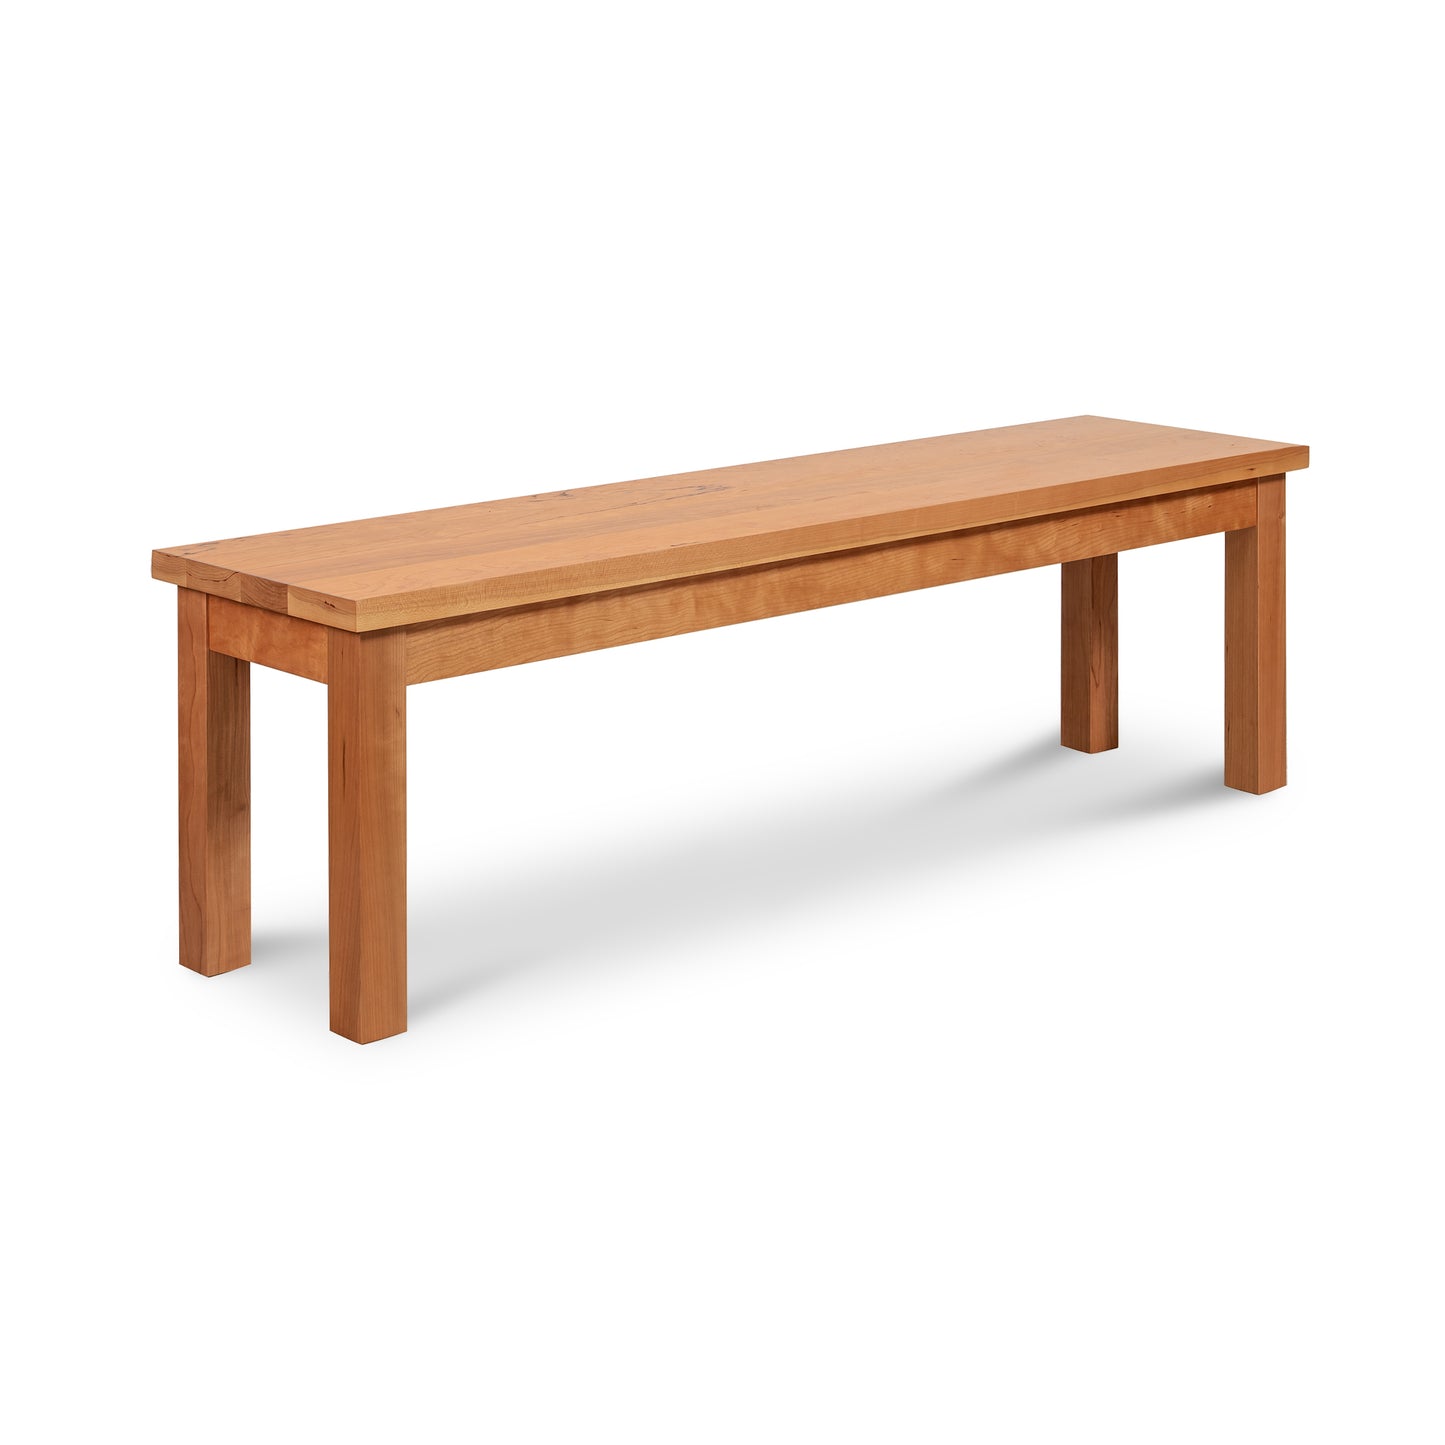 A Lyndon Furniture American Mission Bench - Floor Model on a white background perfect for product description.